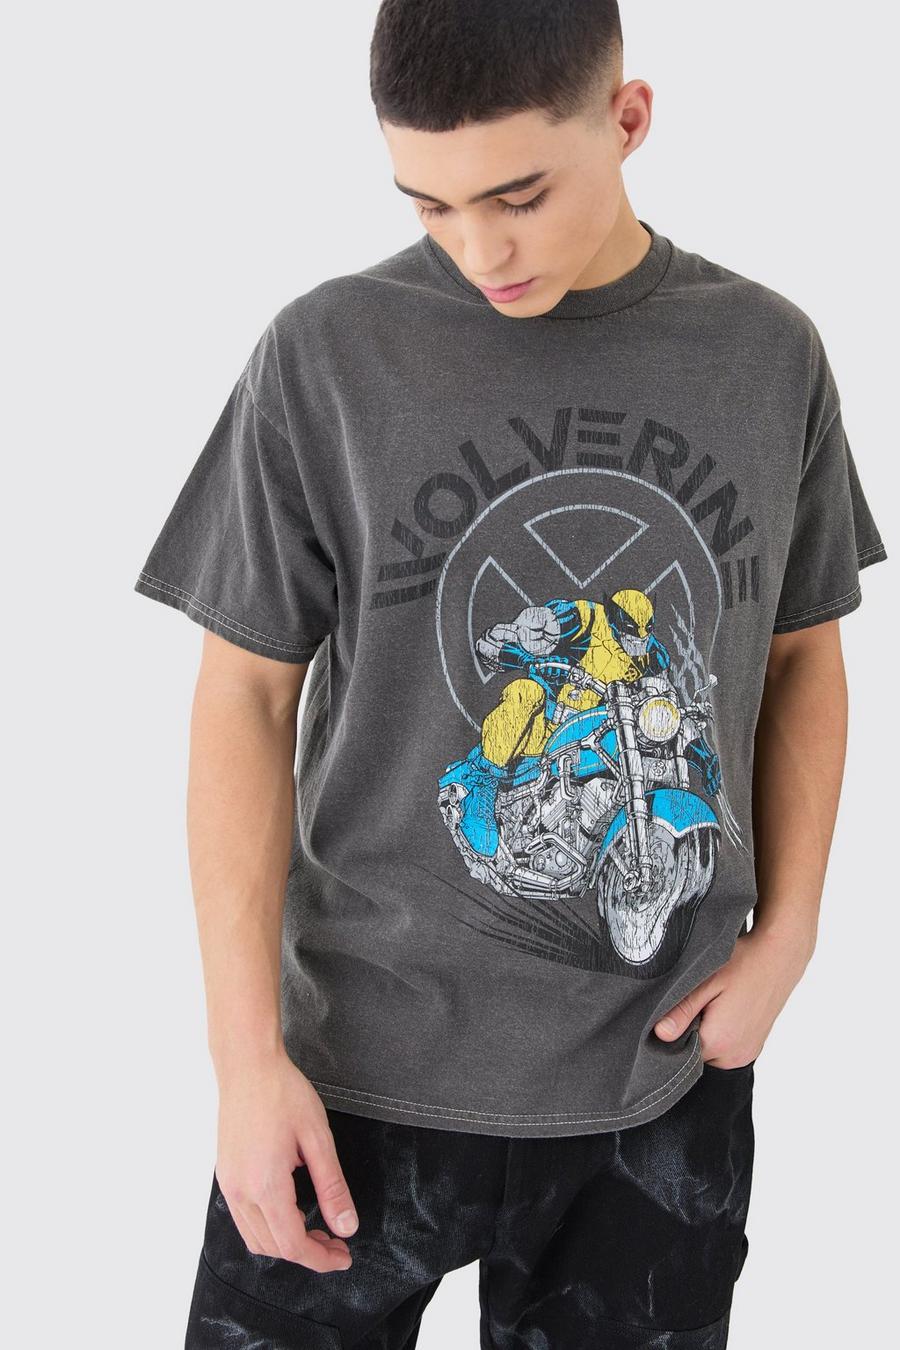 T-shirt oversize ufficiale X Men in lavaggio Wolverine, Charcoal image number 1